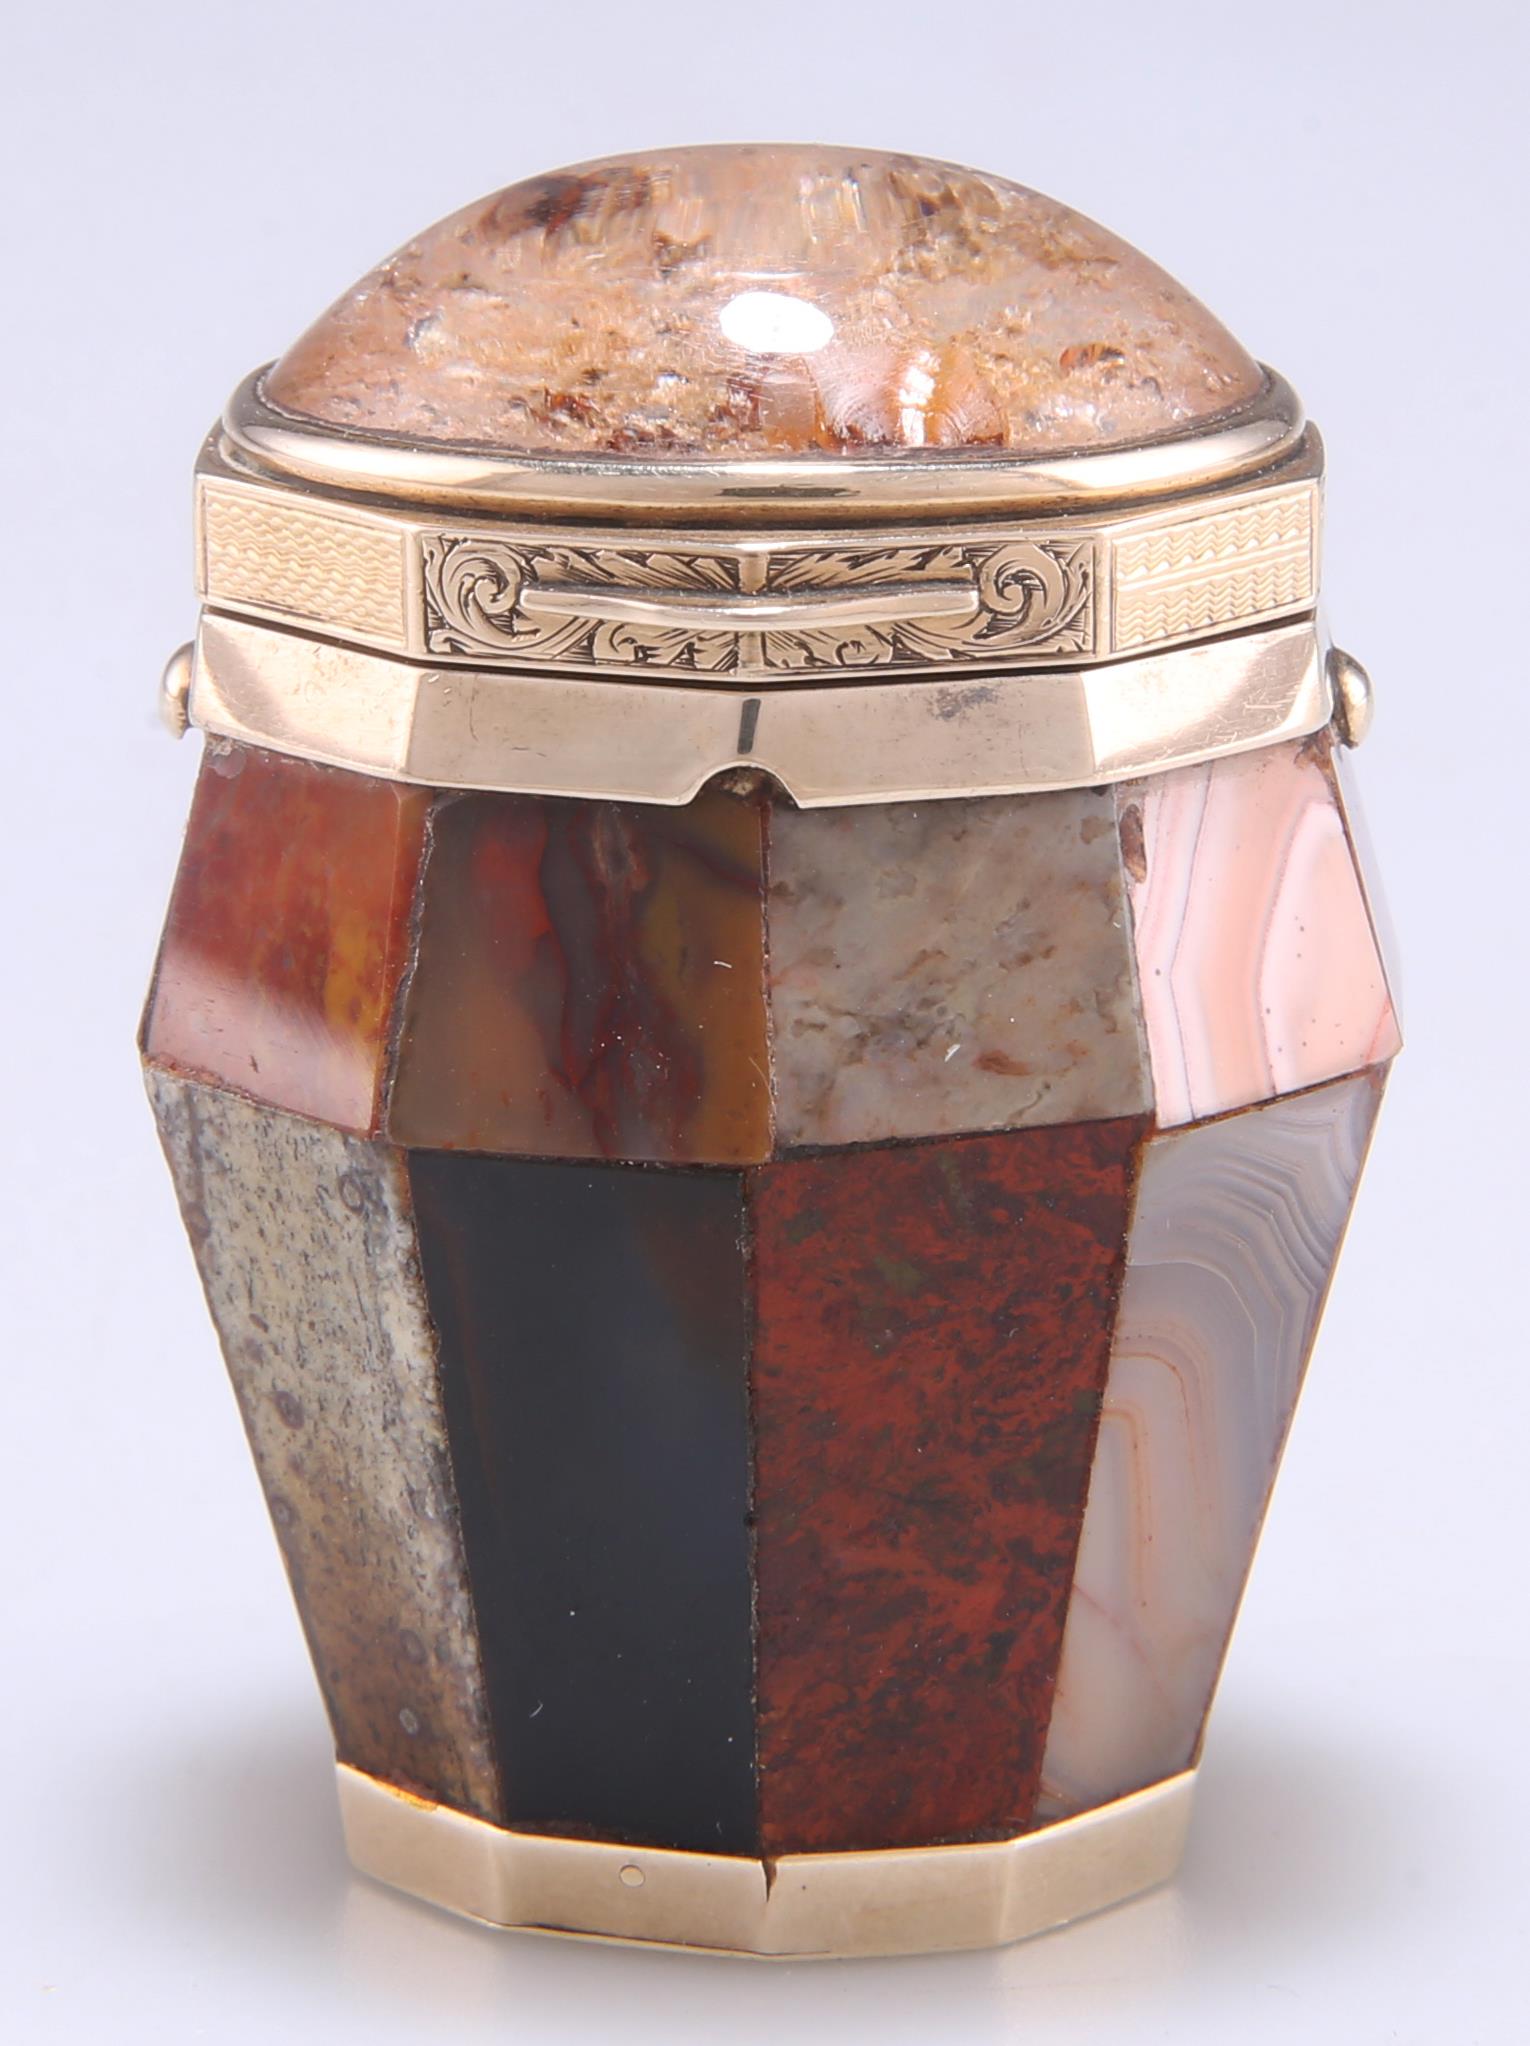 AN EARLY 19TH CENTURY SCOTTISH GOLD-MOUNTED AGATE VINAIGRETTE - Image 2 of 2